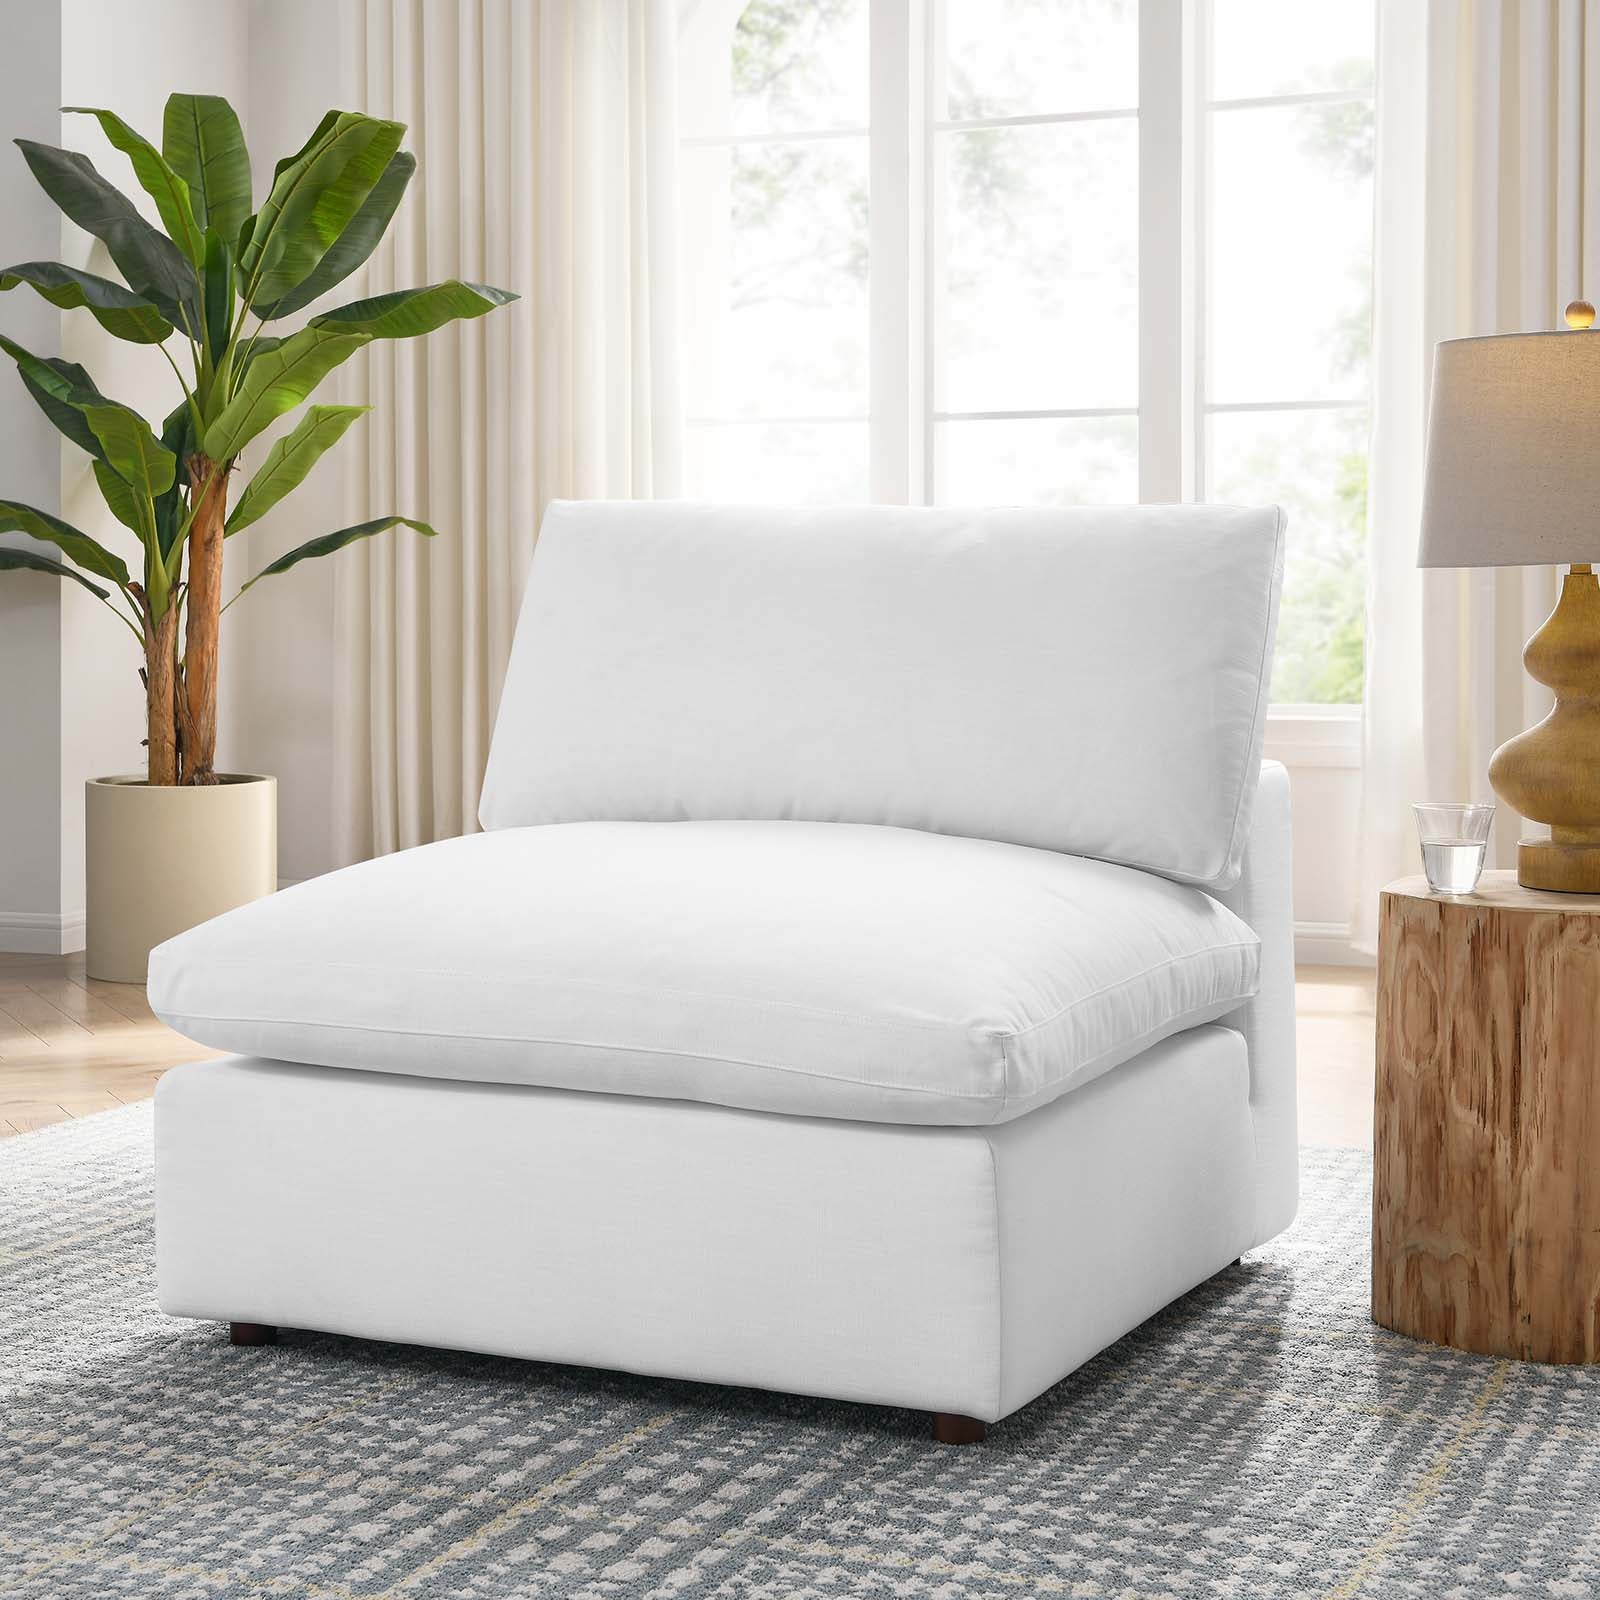 Commix Down Filled Overstuffed Armless Chair - East Shore Modern Home Furnishings